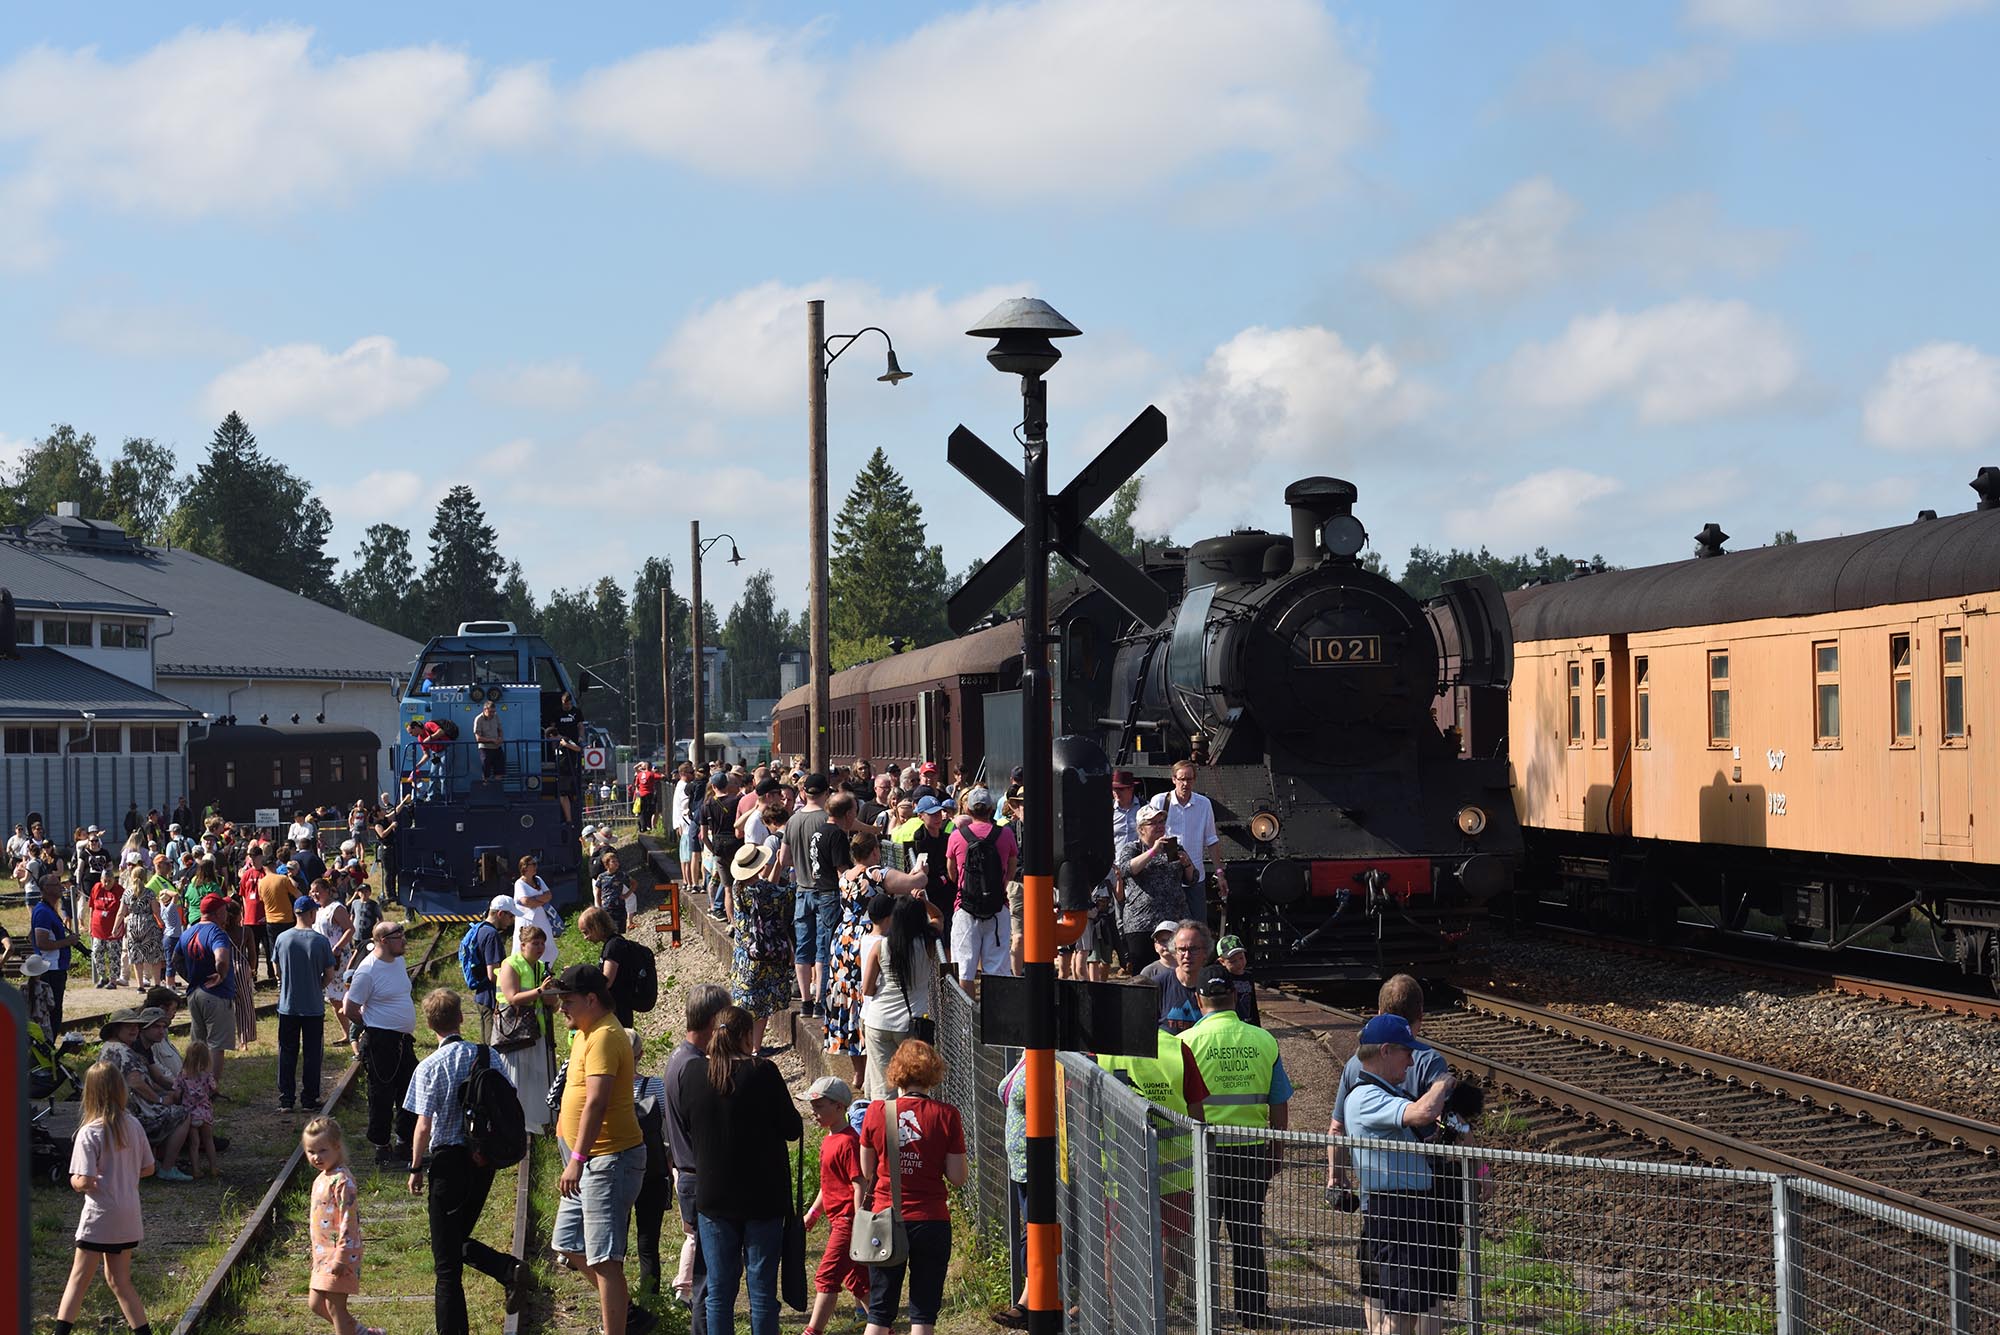 Lots of people and rolling stock on the Railway Museum Day on museum´s railway yard.